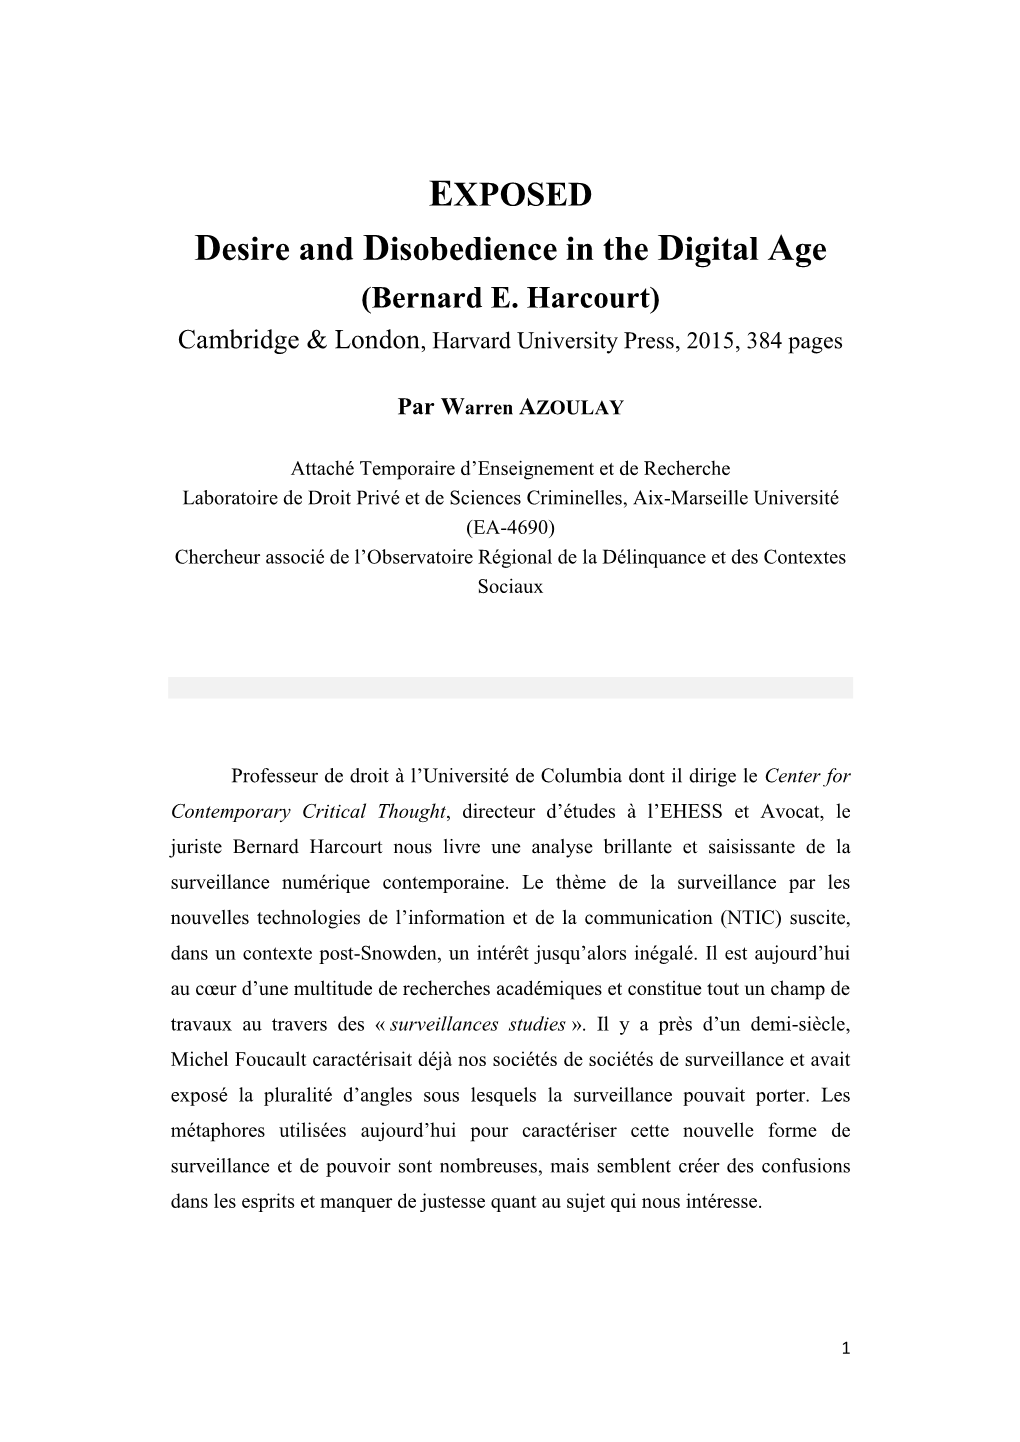 EXPOSED Desire and Disobedience in the Digital Age (Bernard E